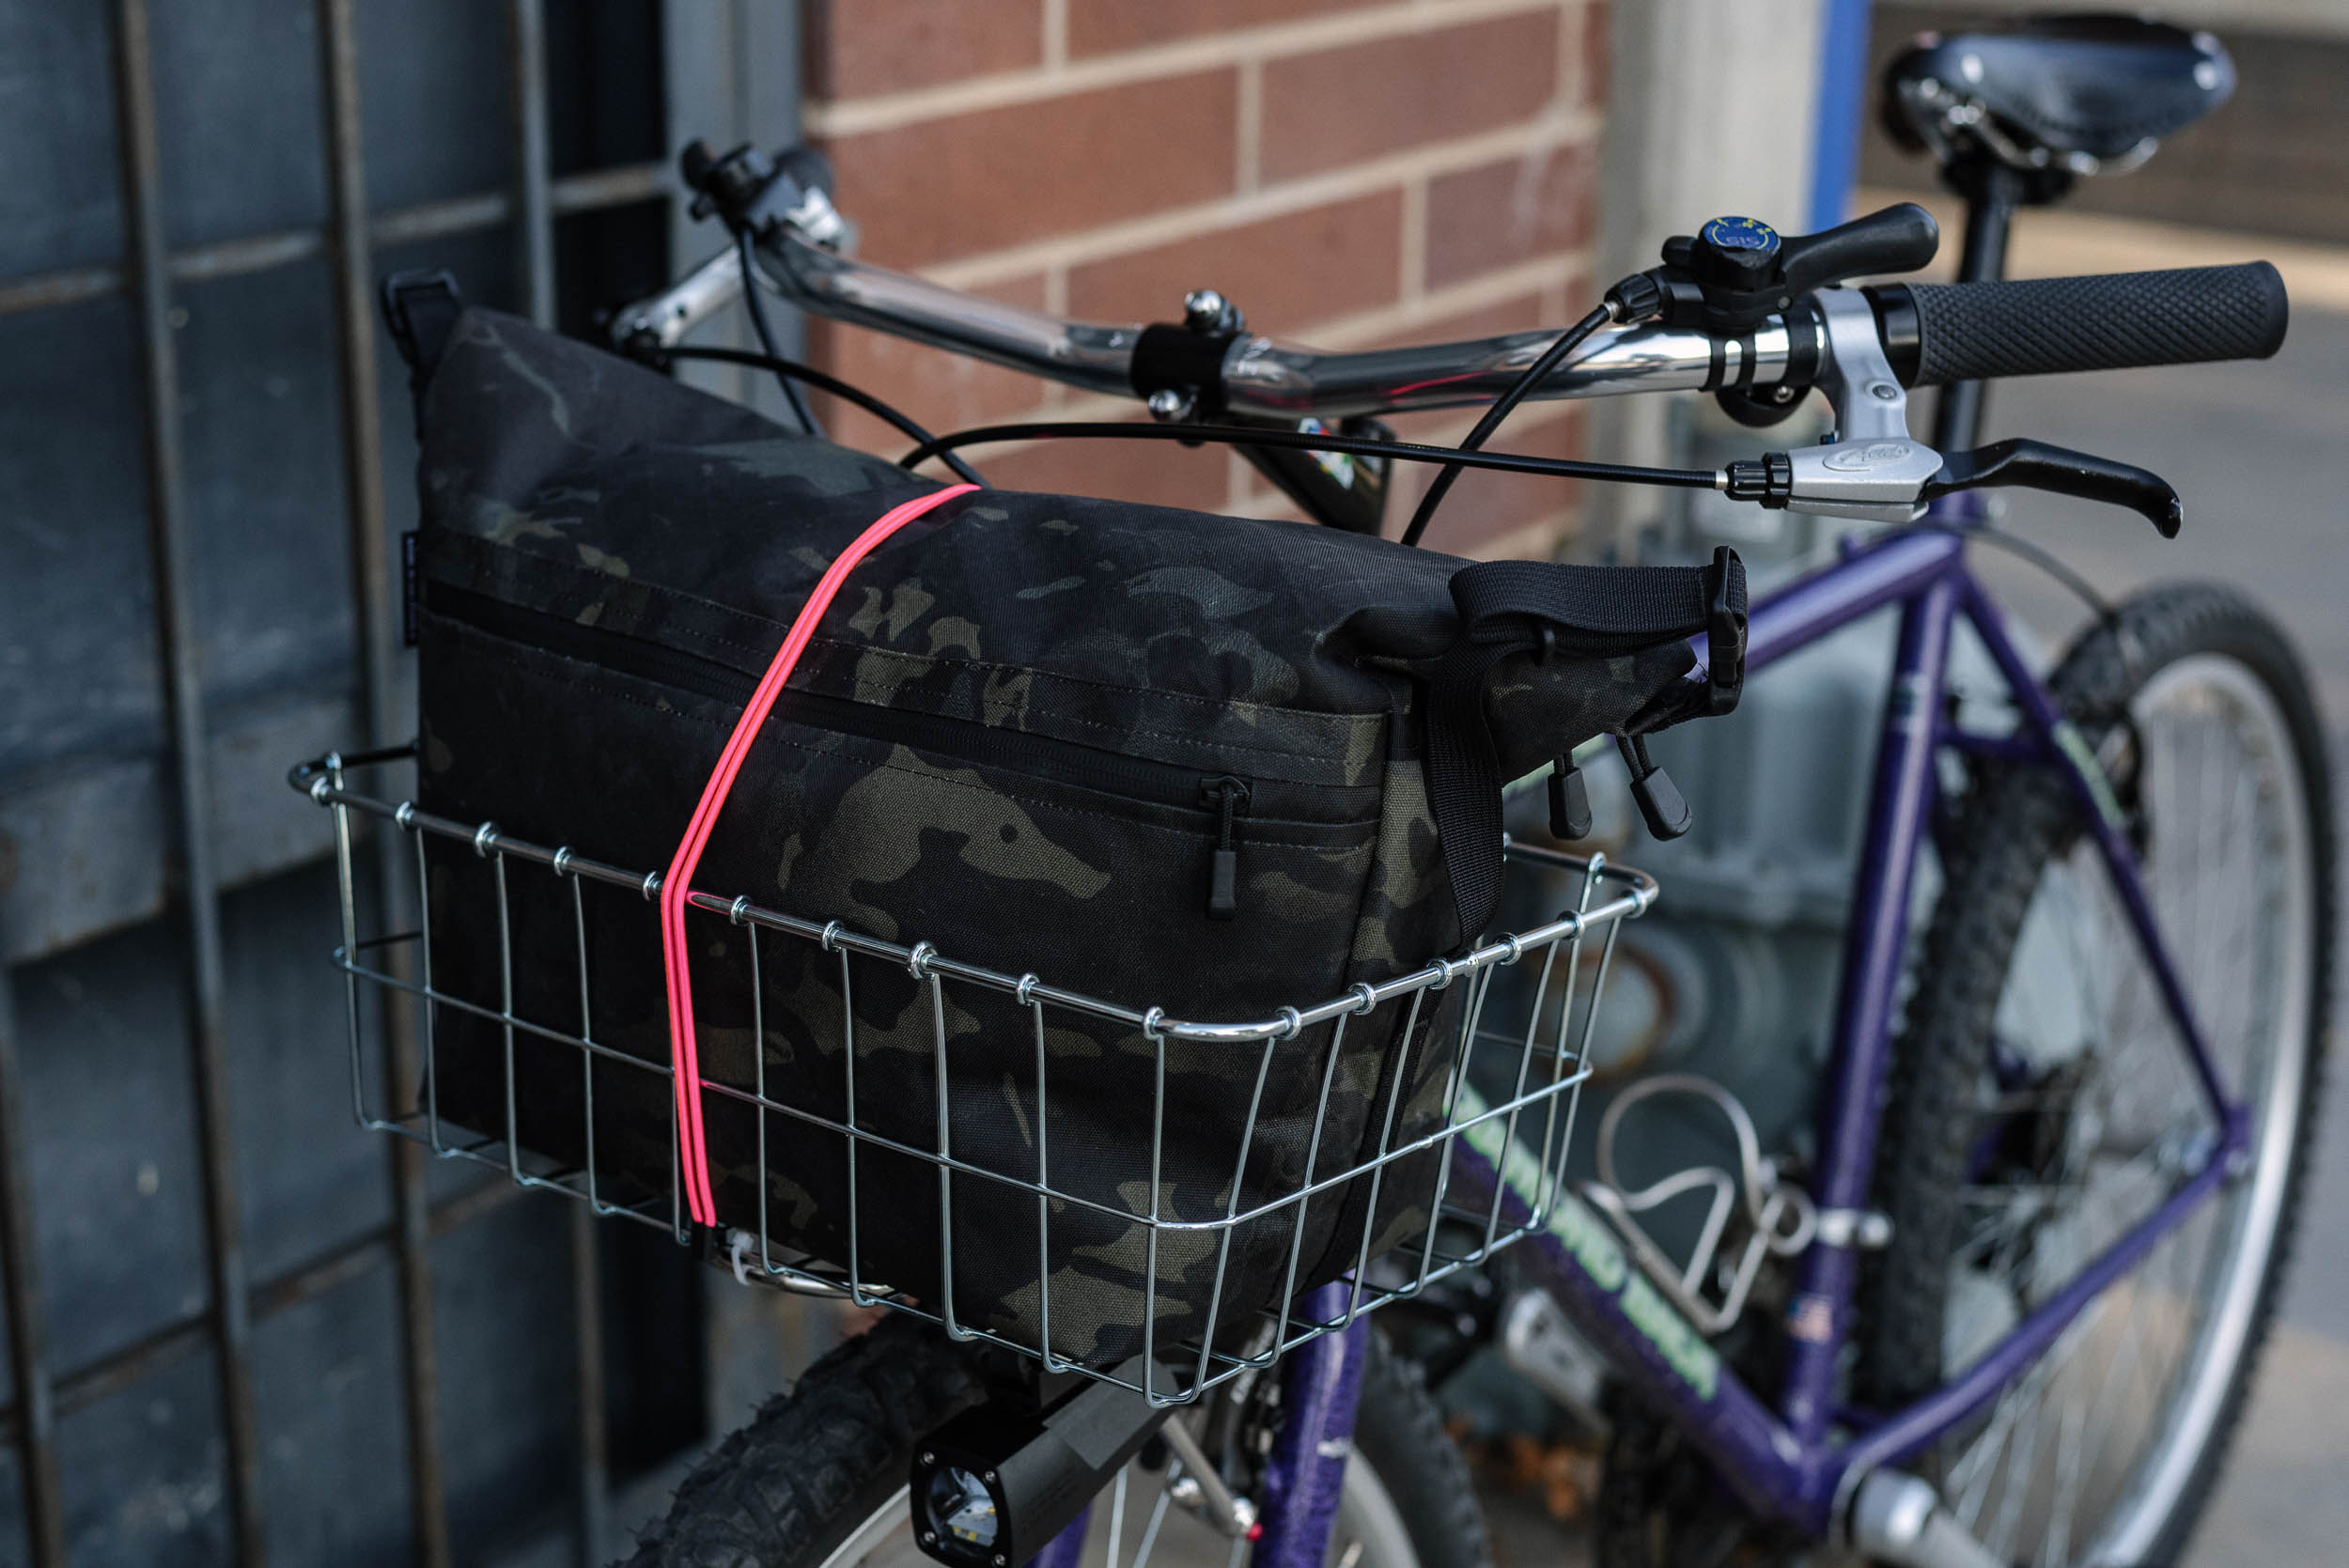 Everyday Tote for Basket or Rack - Outer Shell Bike Bags